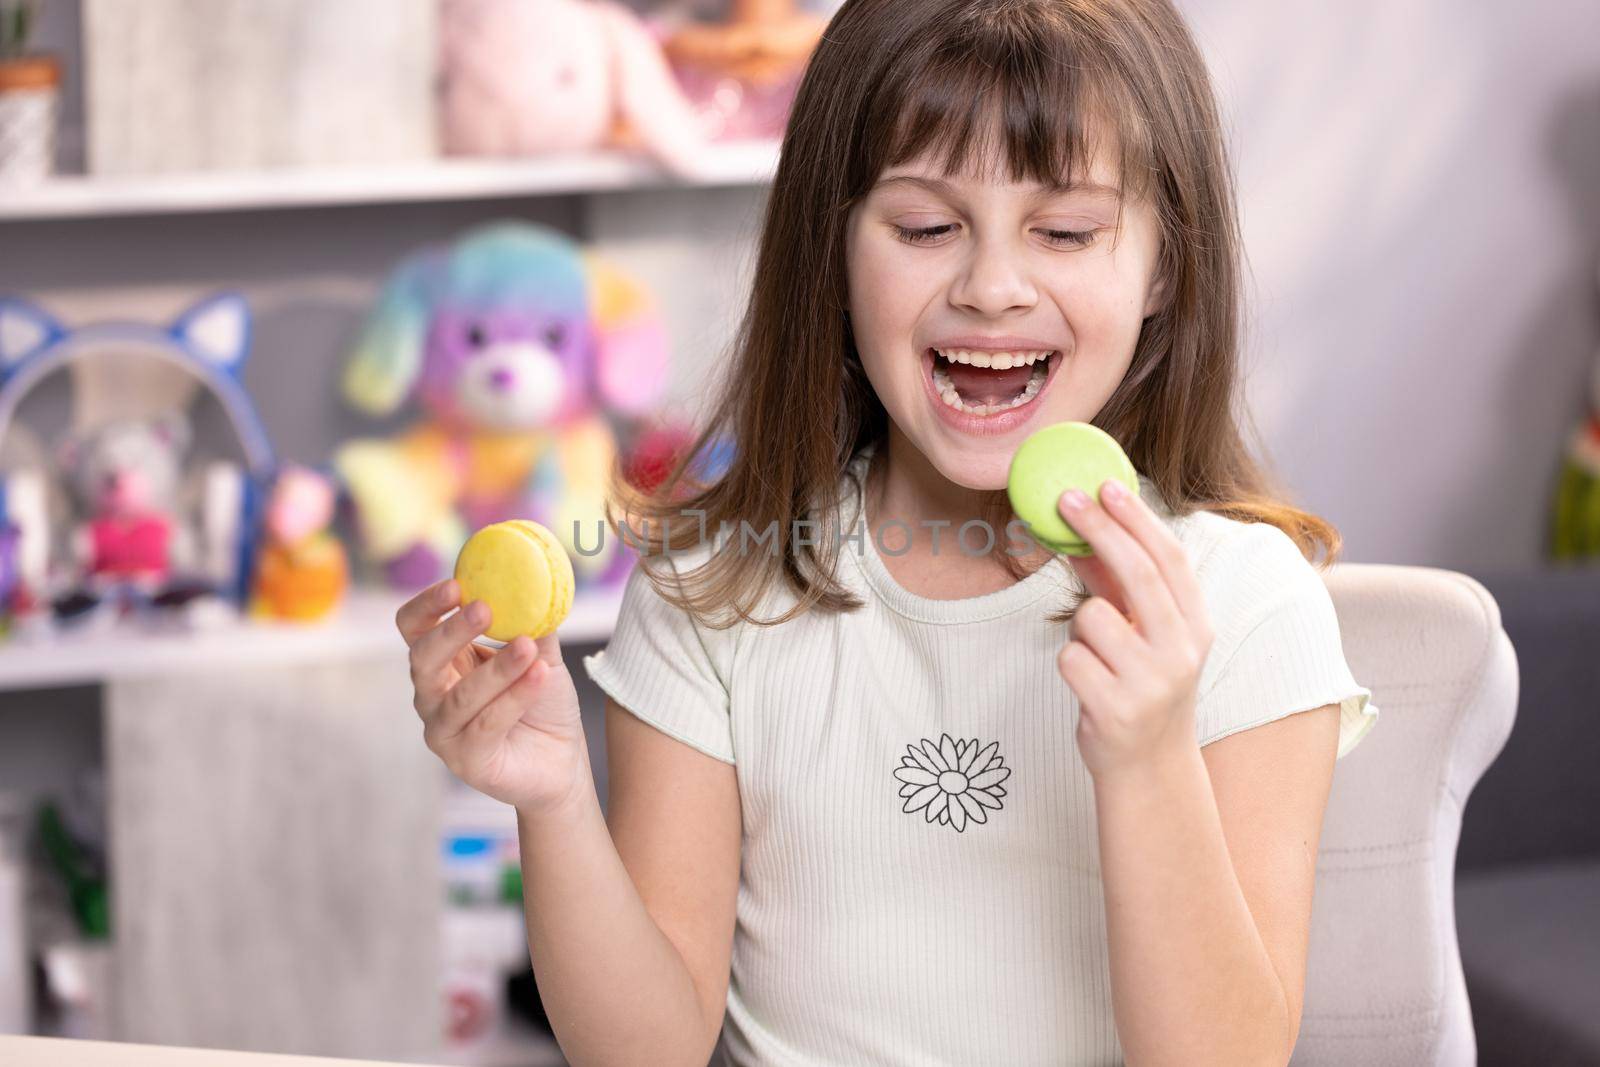 Teen girl plays with dessert macarons, holding the cookies like glasses around the eyes. Happy smiling face of a little girl covering her eyes with macaroons on a colored home background. Being happy.